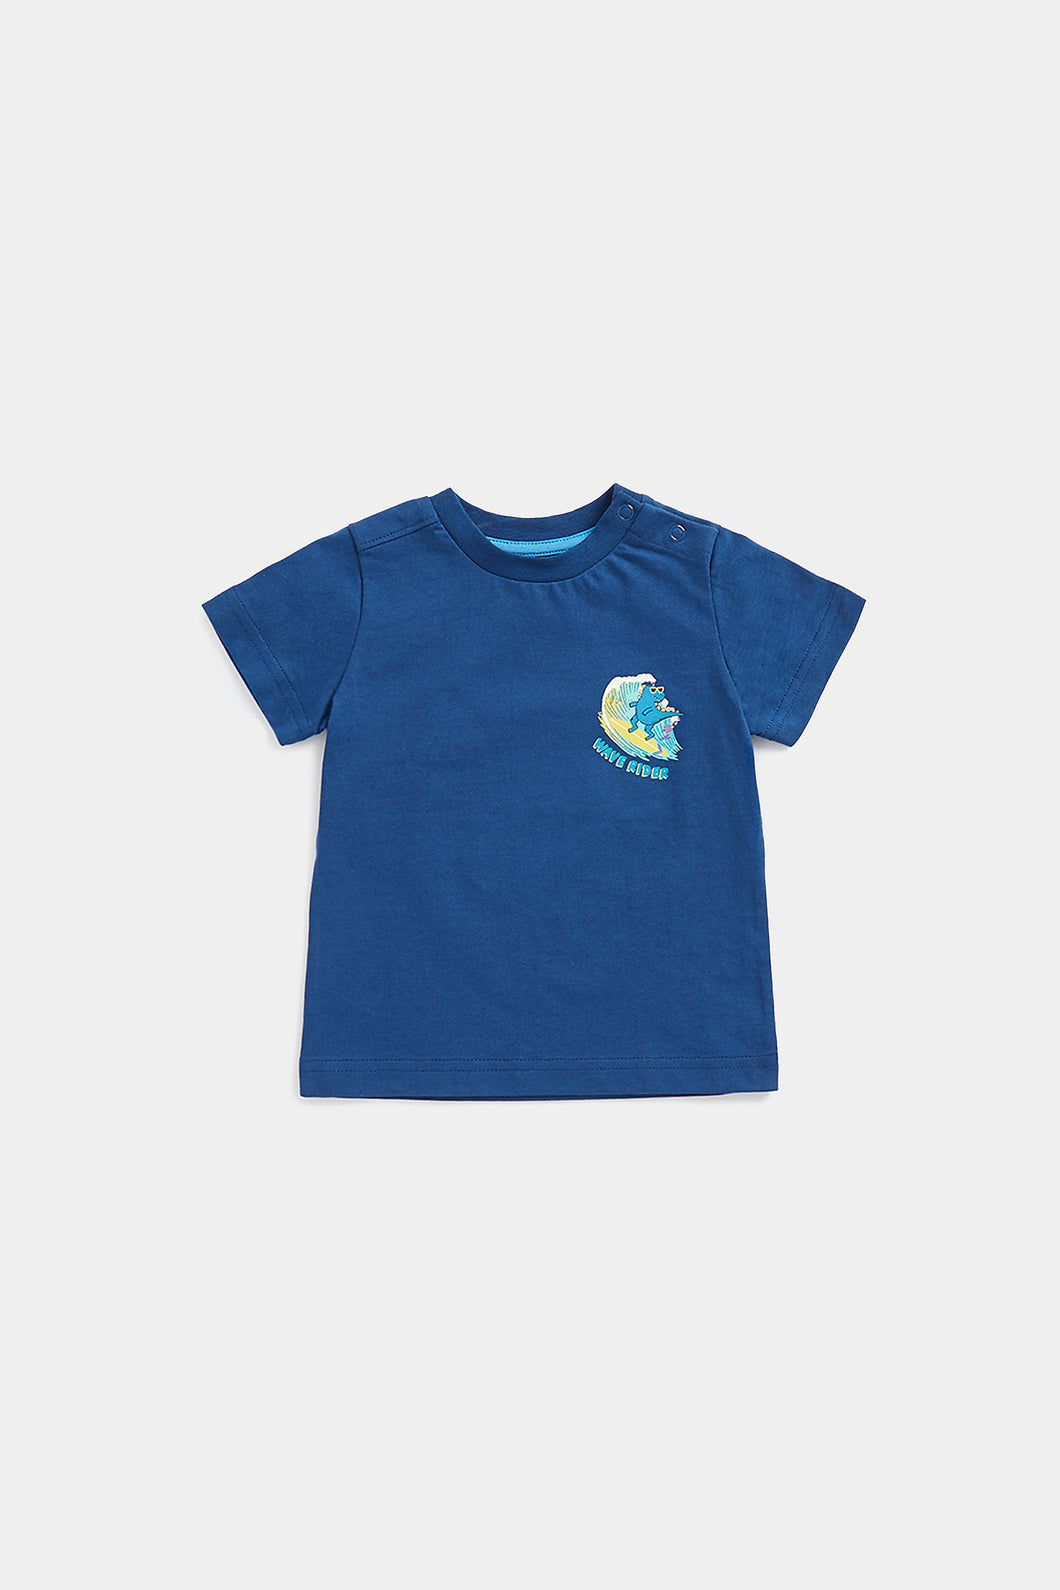 Mothercare Wave Rider T-Shirt